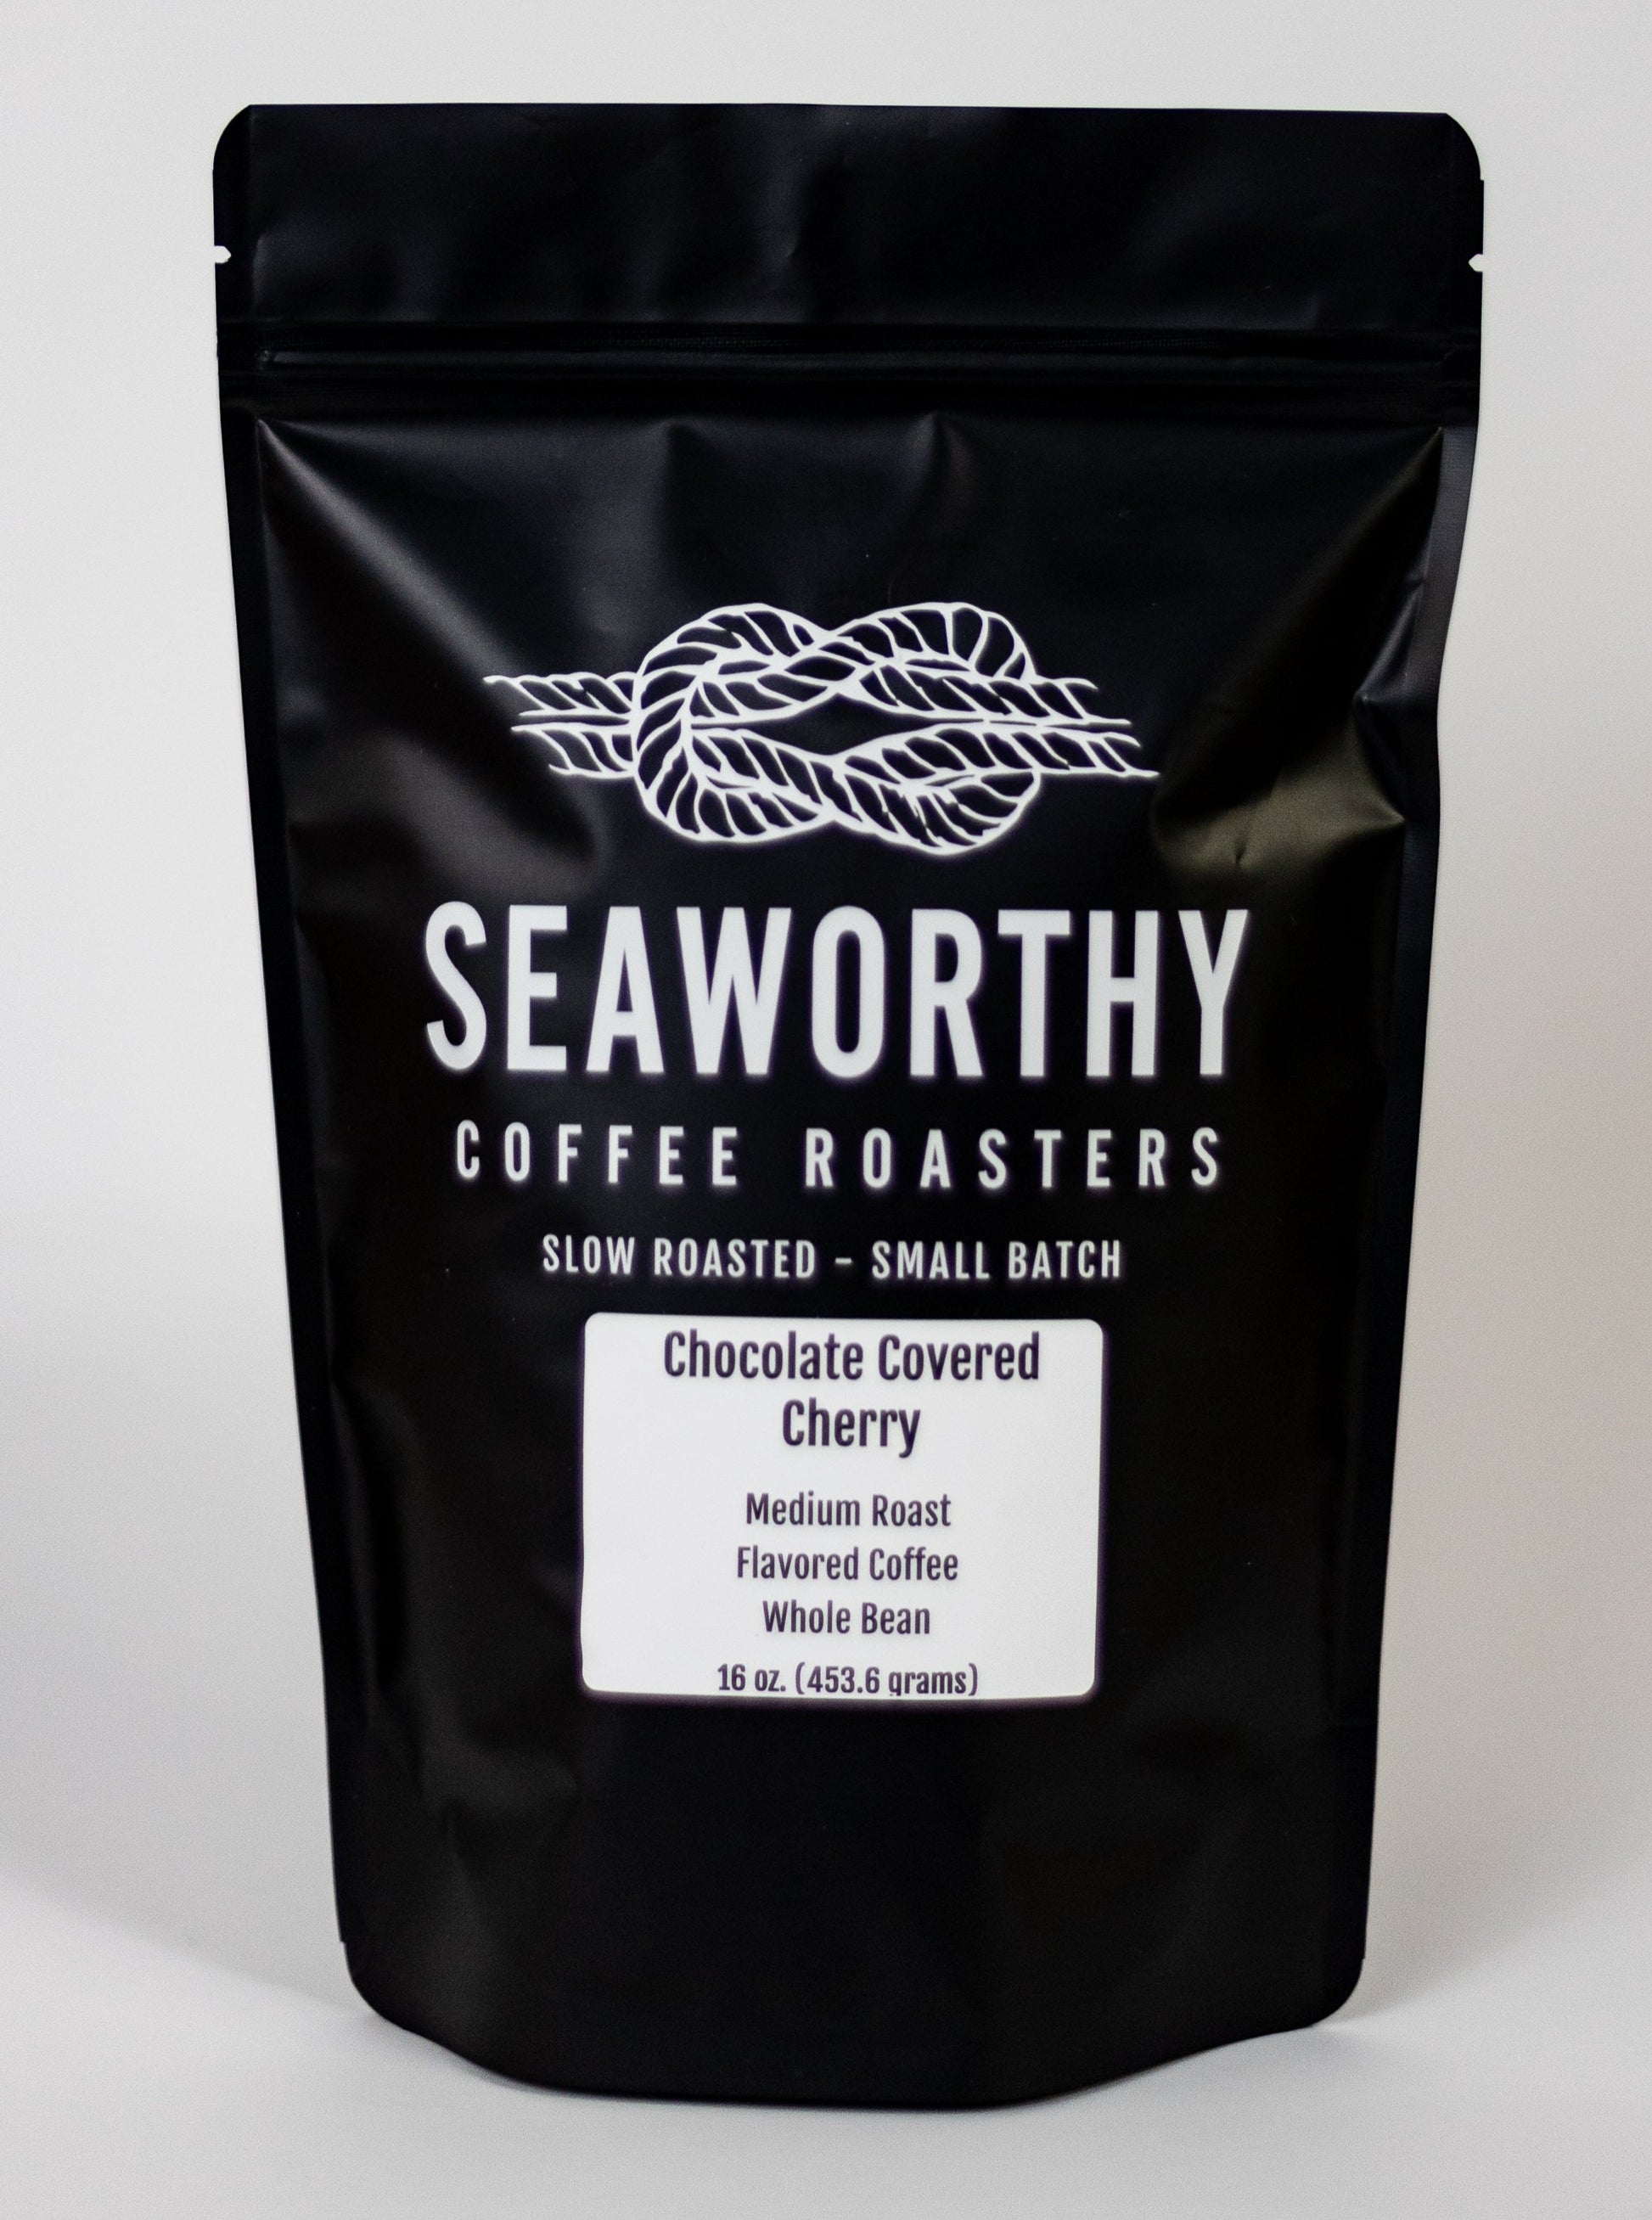 Seaworthy slow roasted, small batch, low acid coffee. 1 pound bag of Chocolate Covered Cherry flavored coffee.